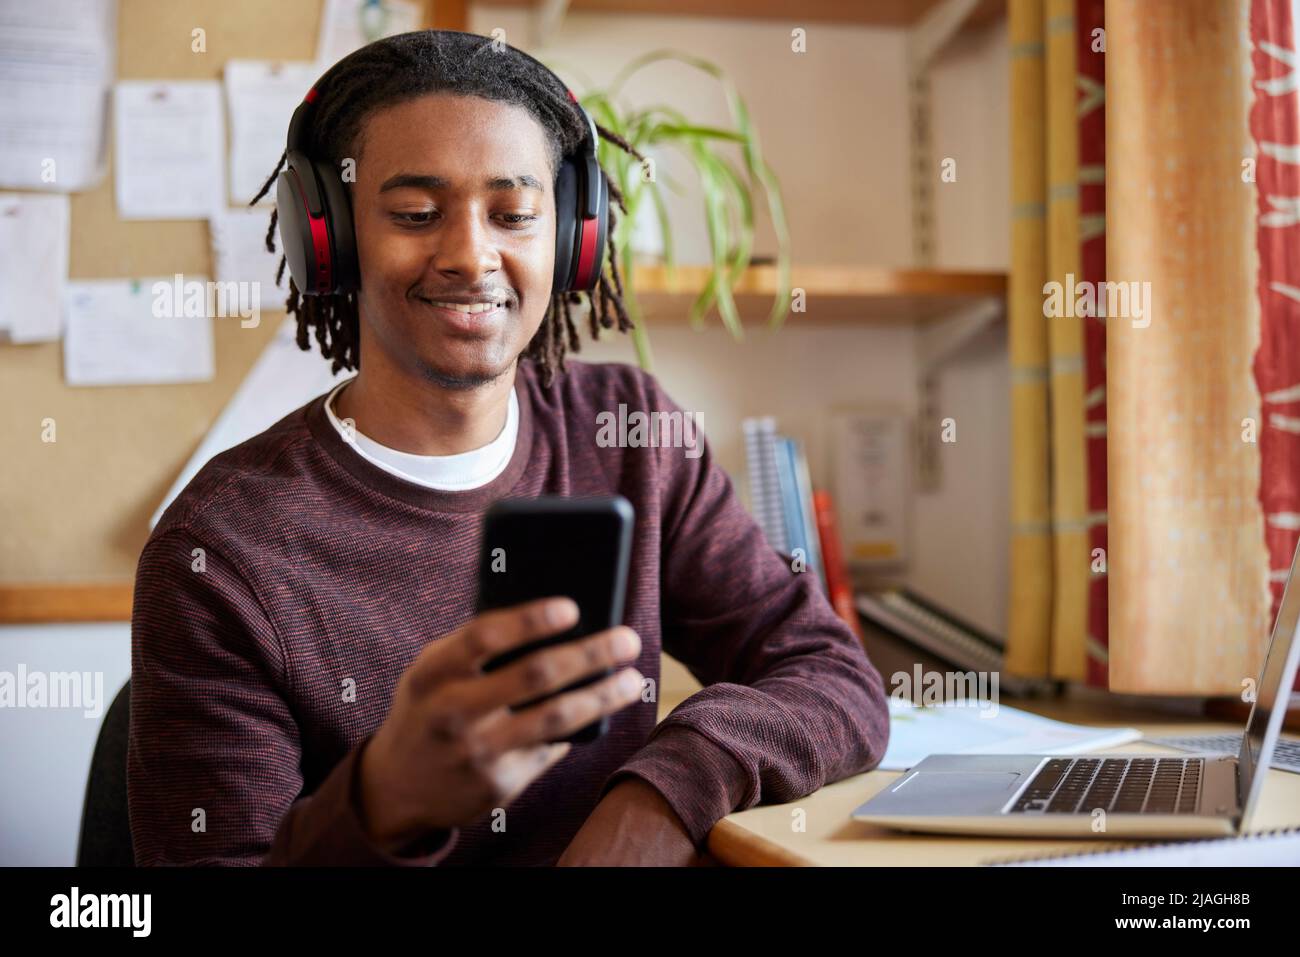 Male University Or College Student Working On Laptop Wearing Wireless Headphones Looking At Mobile Phone  At Desk In Room Stock Photo